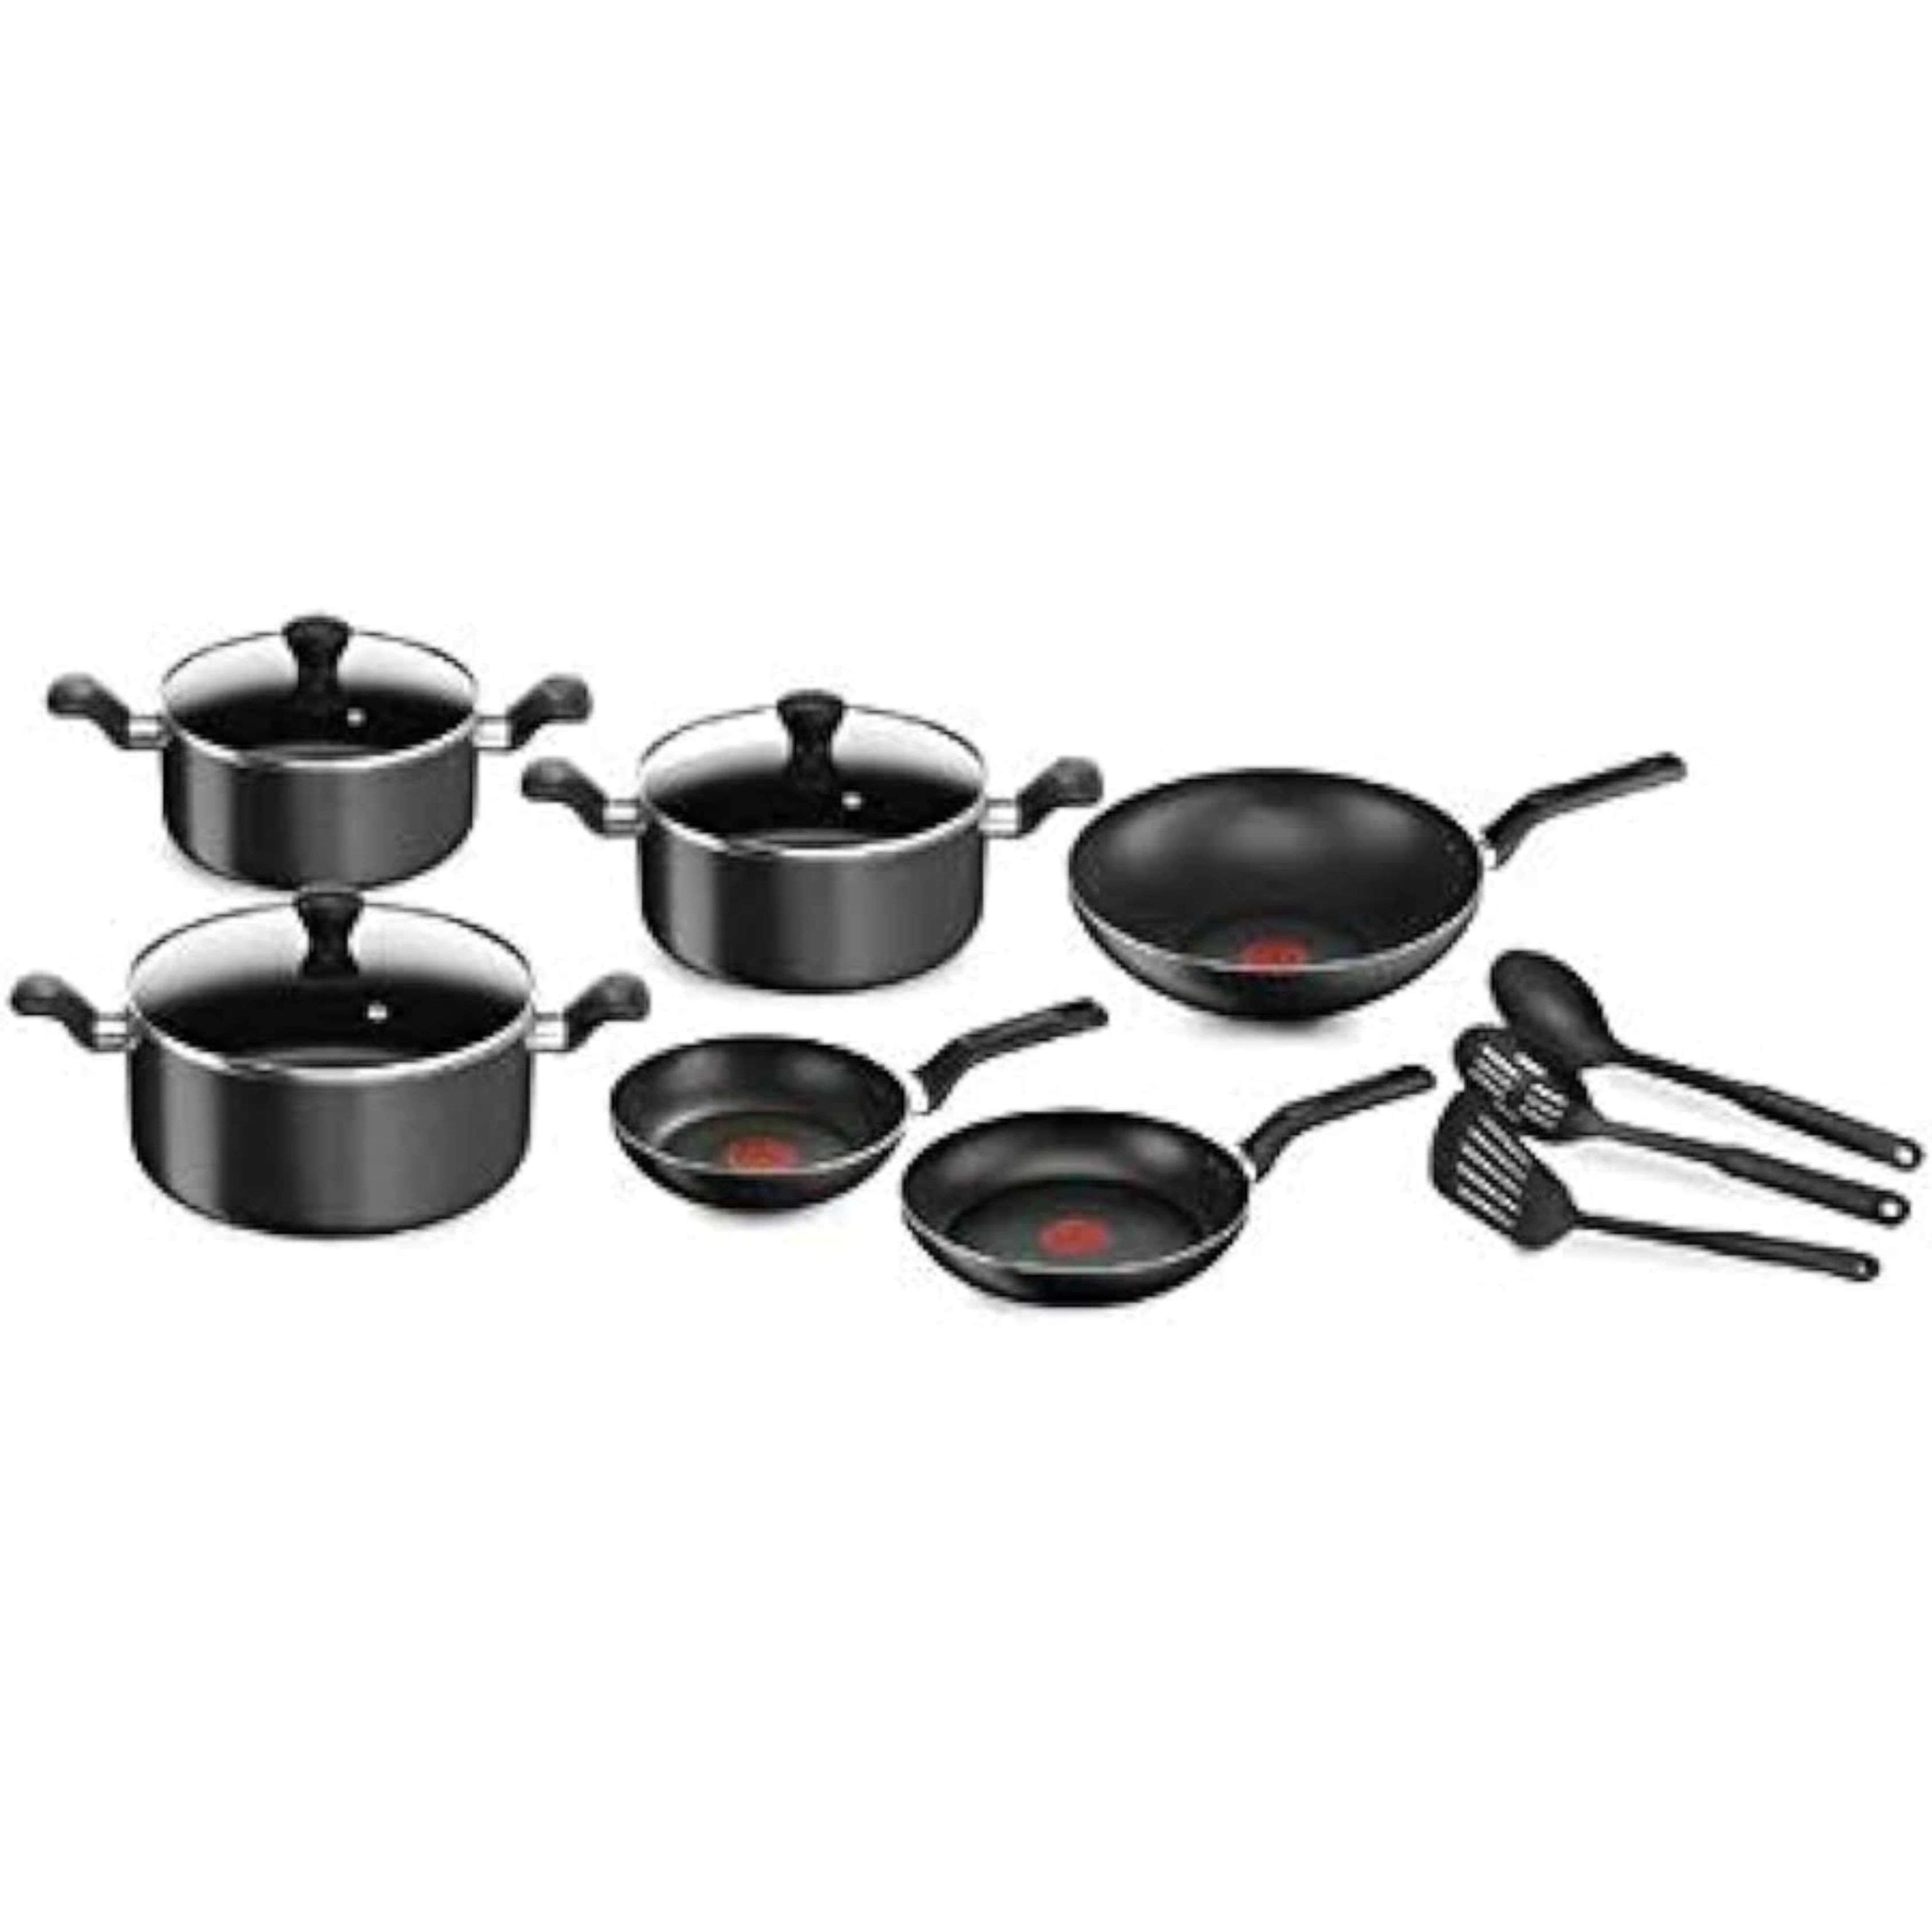 Tefal Cookware Set of 12 Pieces - Non-Stick with Thermo Signal - Black - Super Cook B143SC86 Frypan: 22 & 24 cm Wokpan: 28 cm Stewpots: 22, 24 & 28 cm